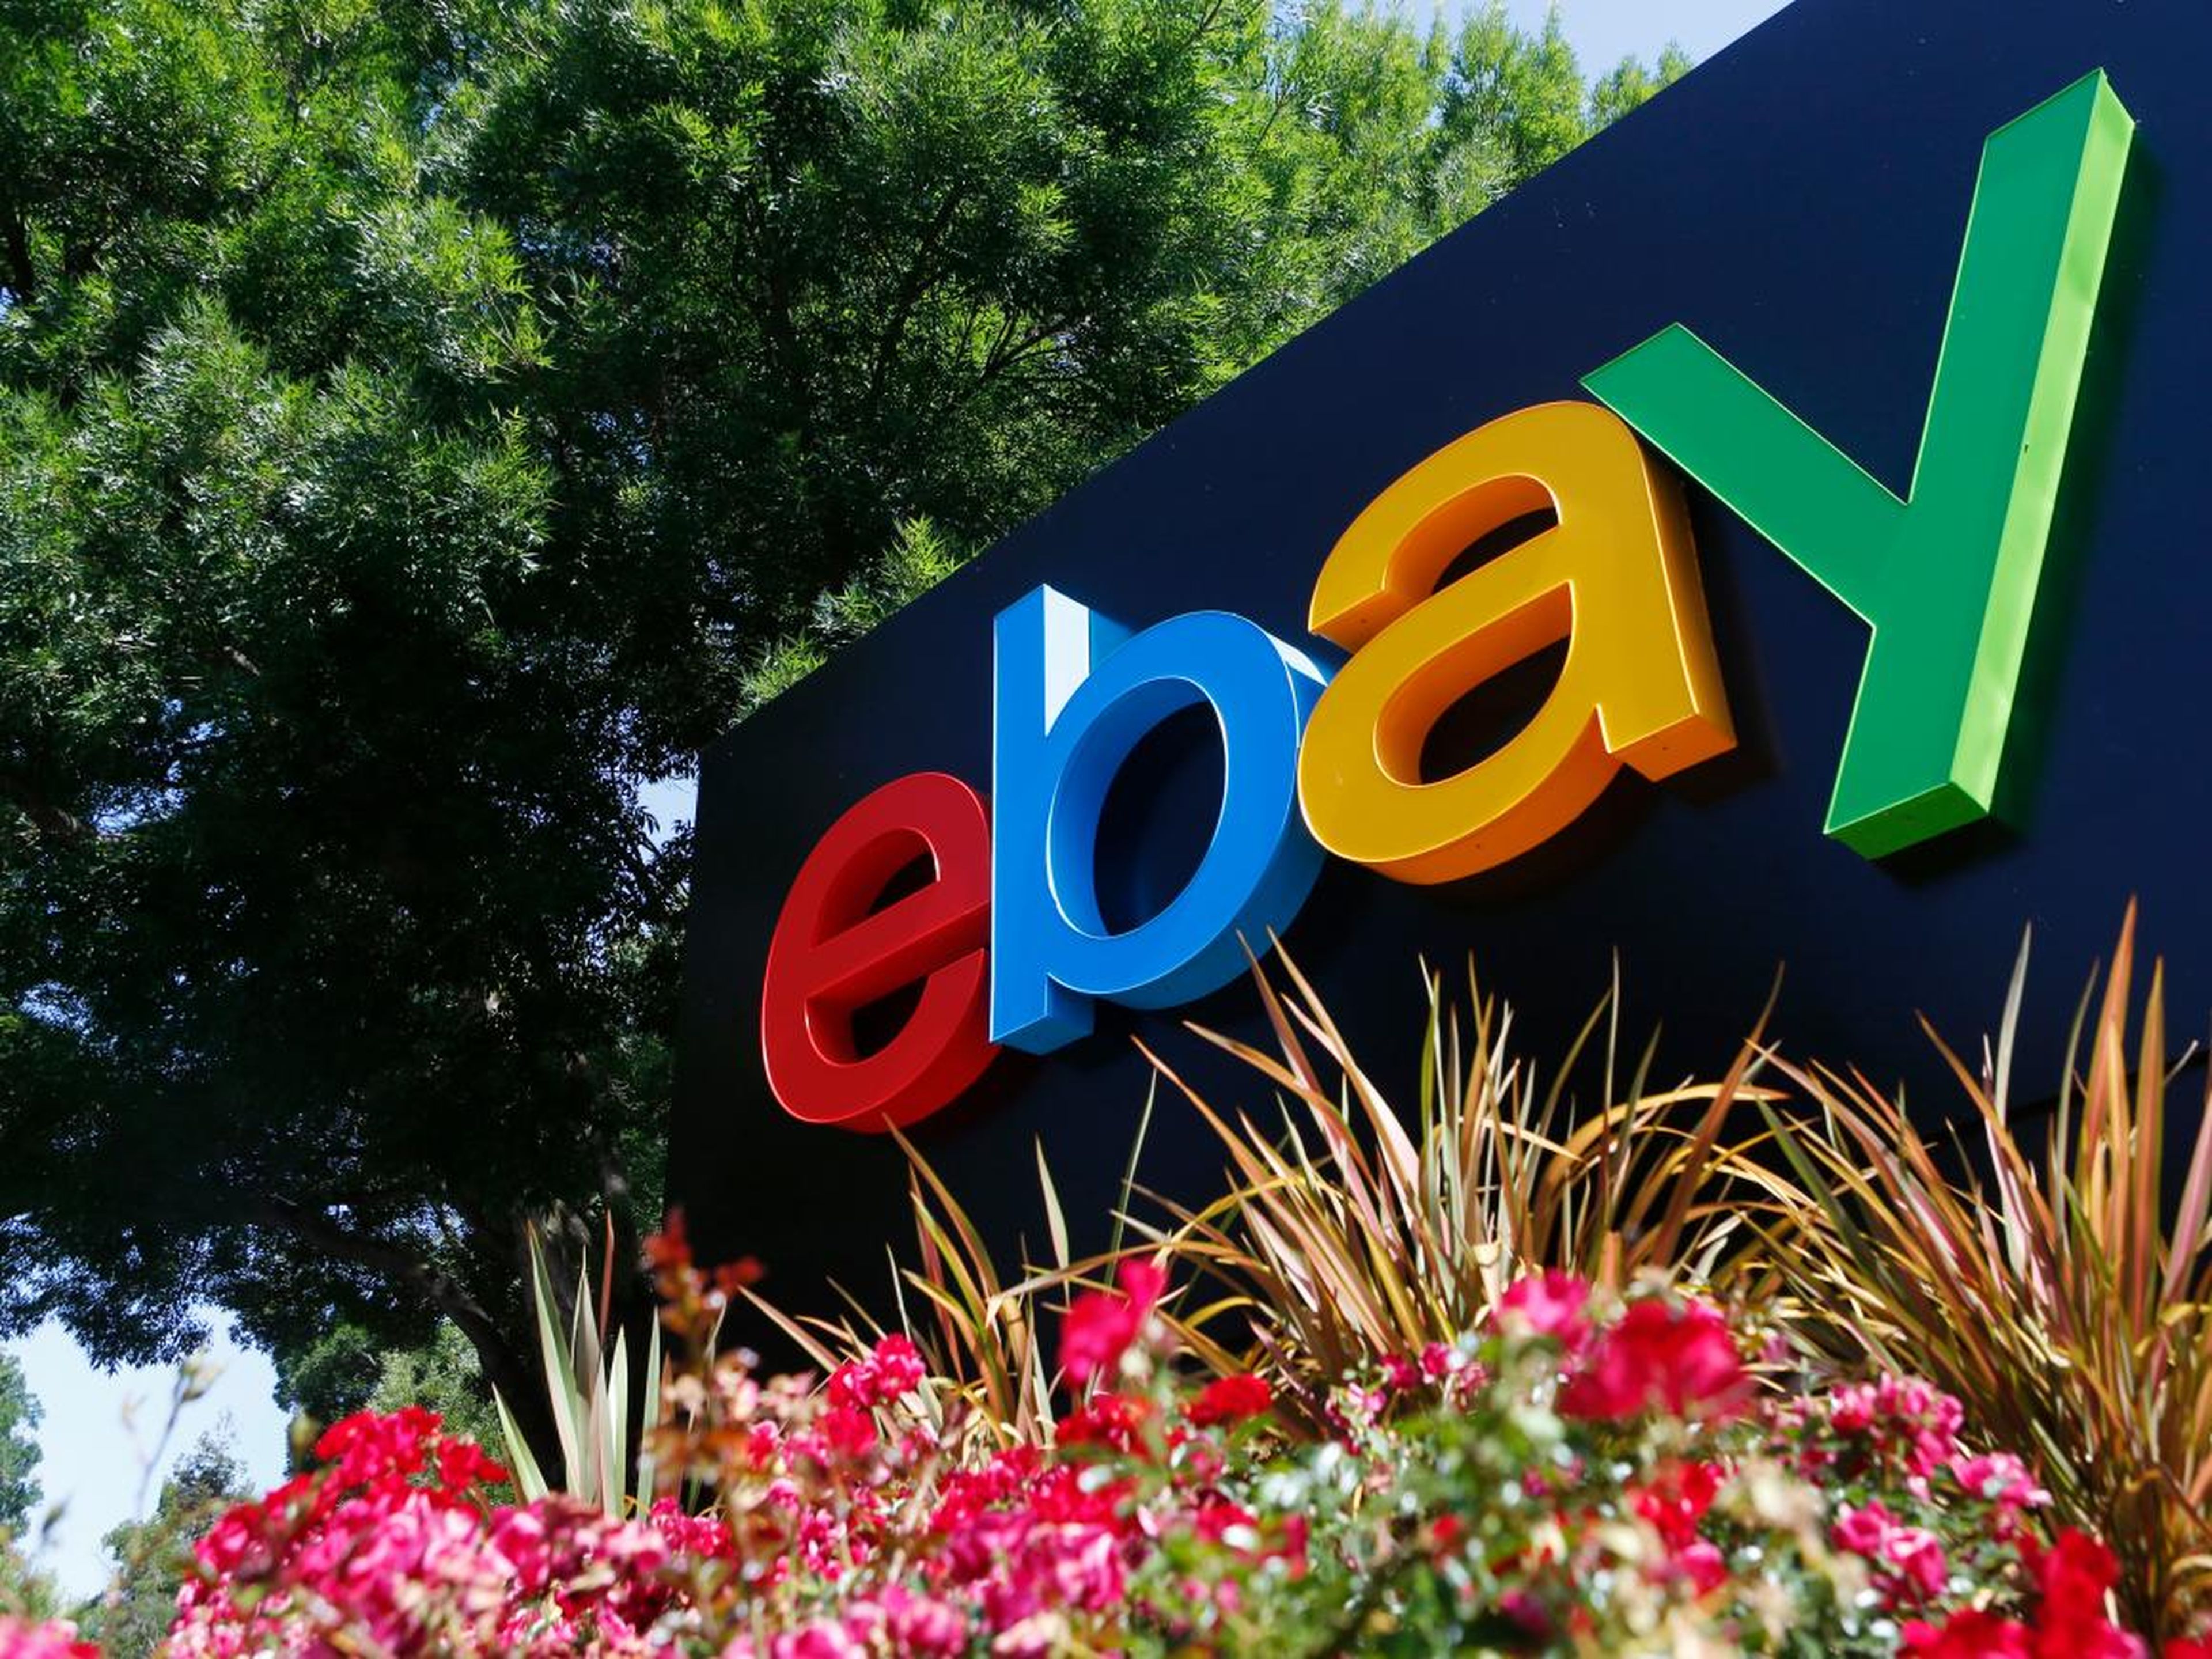 8. A 2014 cyber attack on eBay stole login credentials of up to 145 million users.